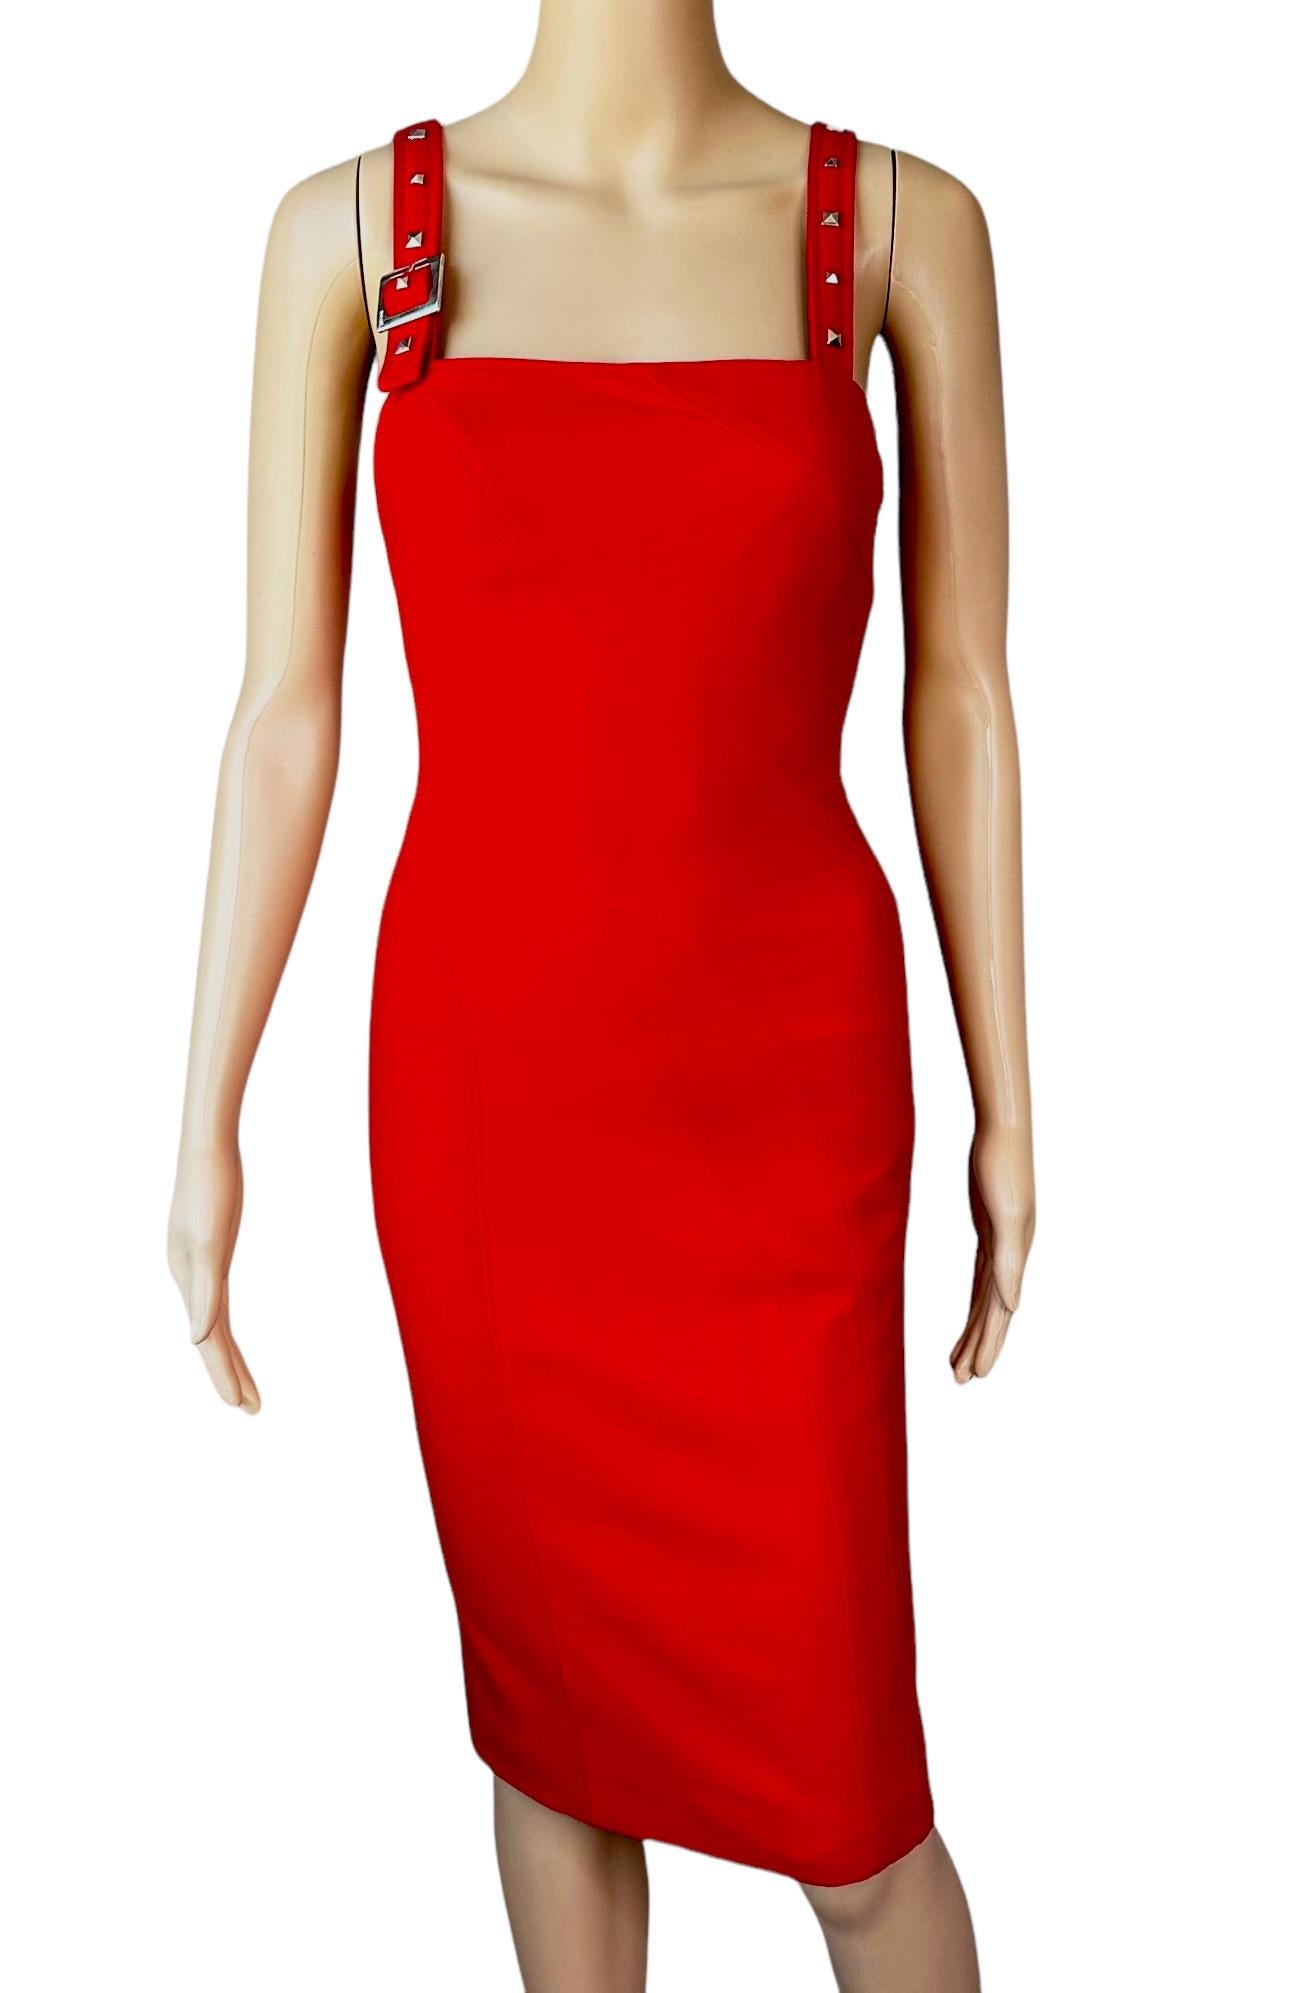 Versace F/W 2004 Runway Embellished Buckle Studded Detail Red Evening Dress In Excellent Condition For Sale In Naples, FL